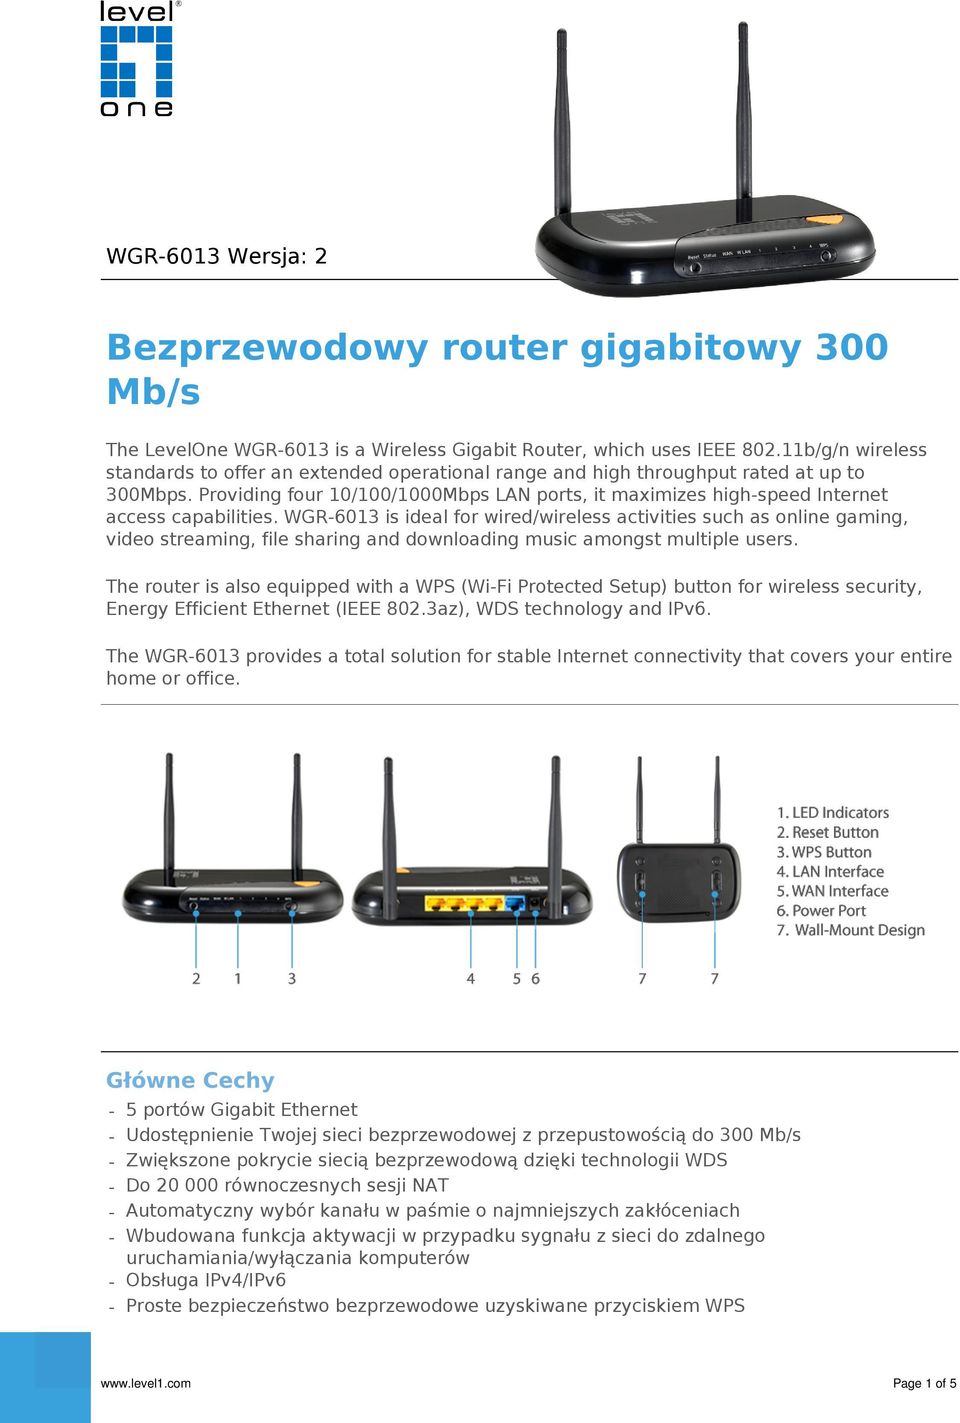 Providing four 10/100/1000Mbps LAN ports, it maximizes high-speed Internet access capabilities.